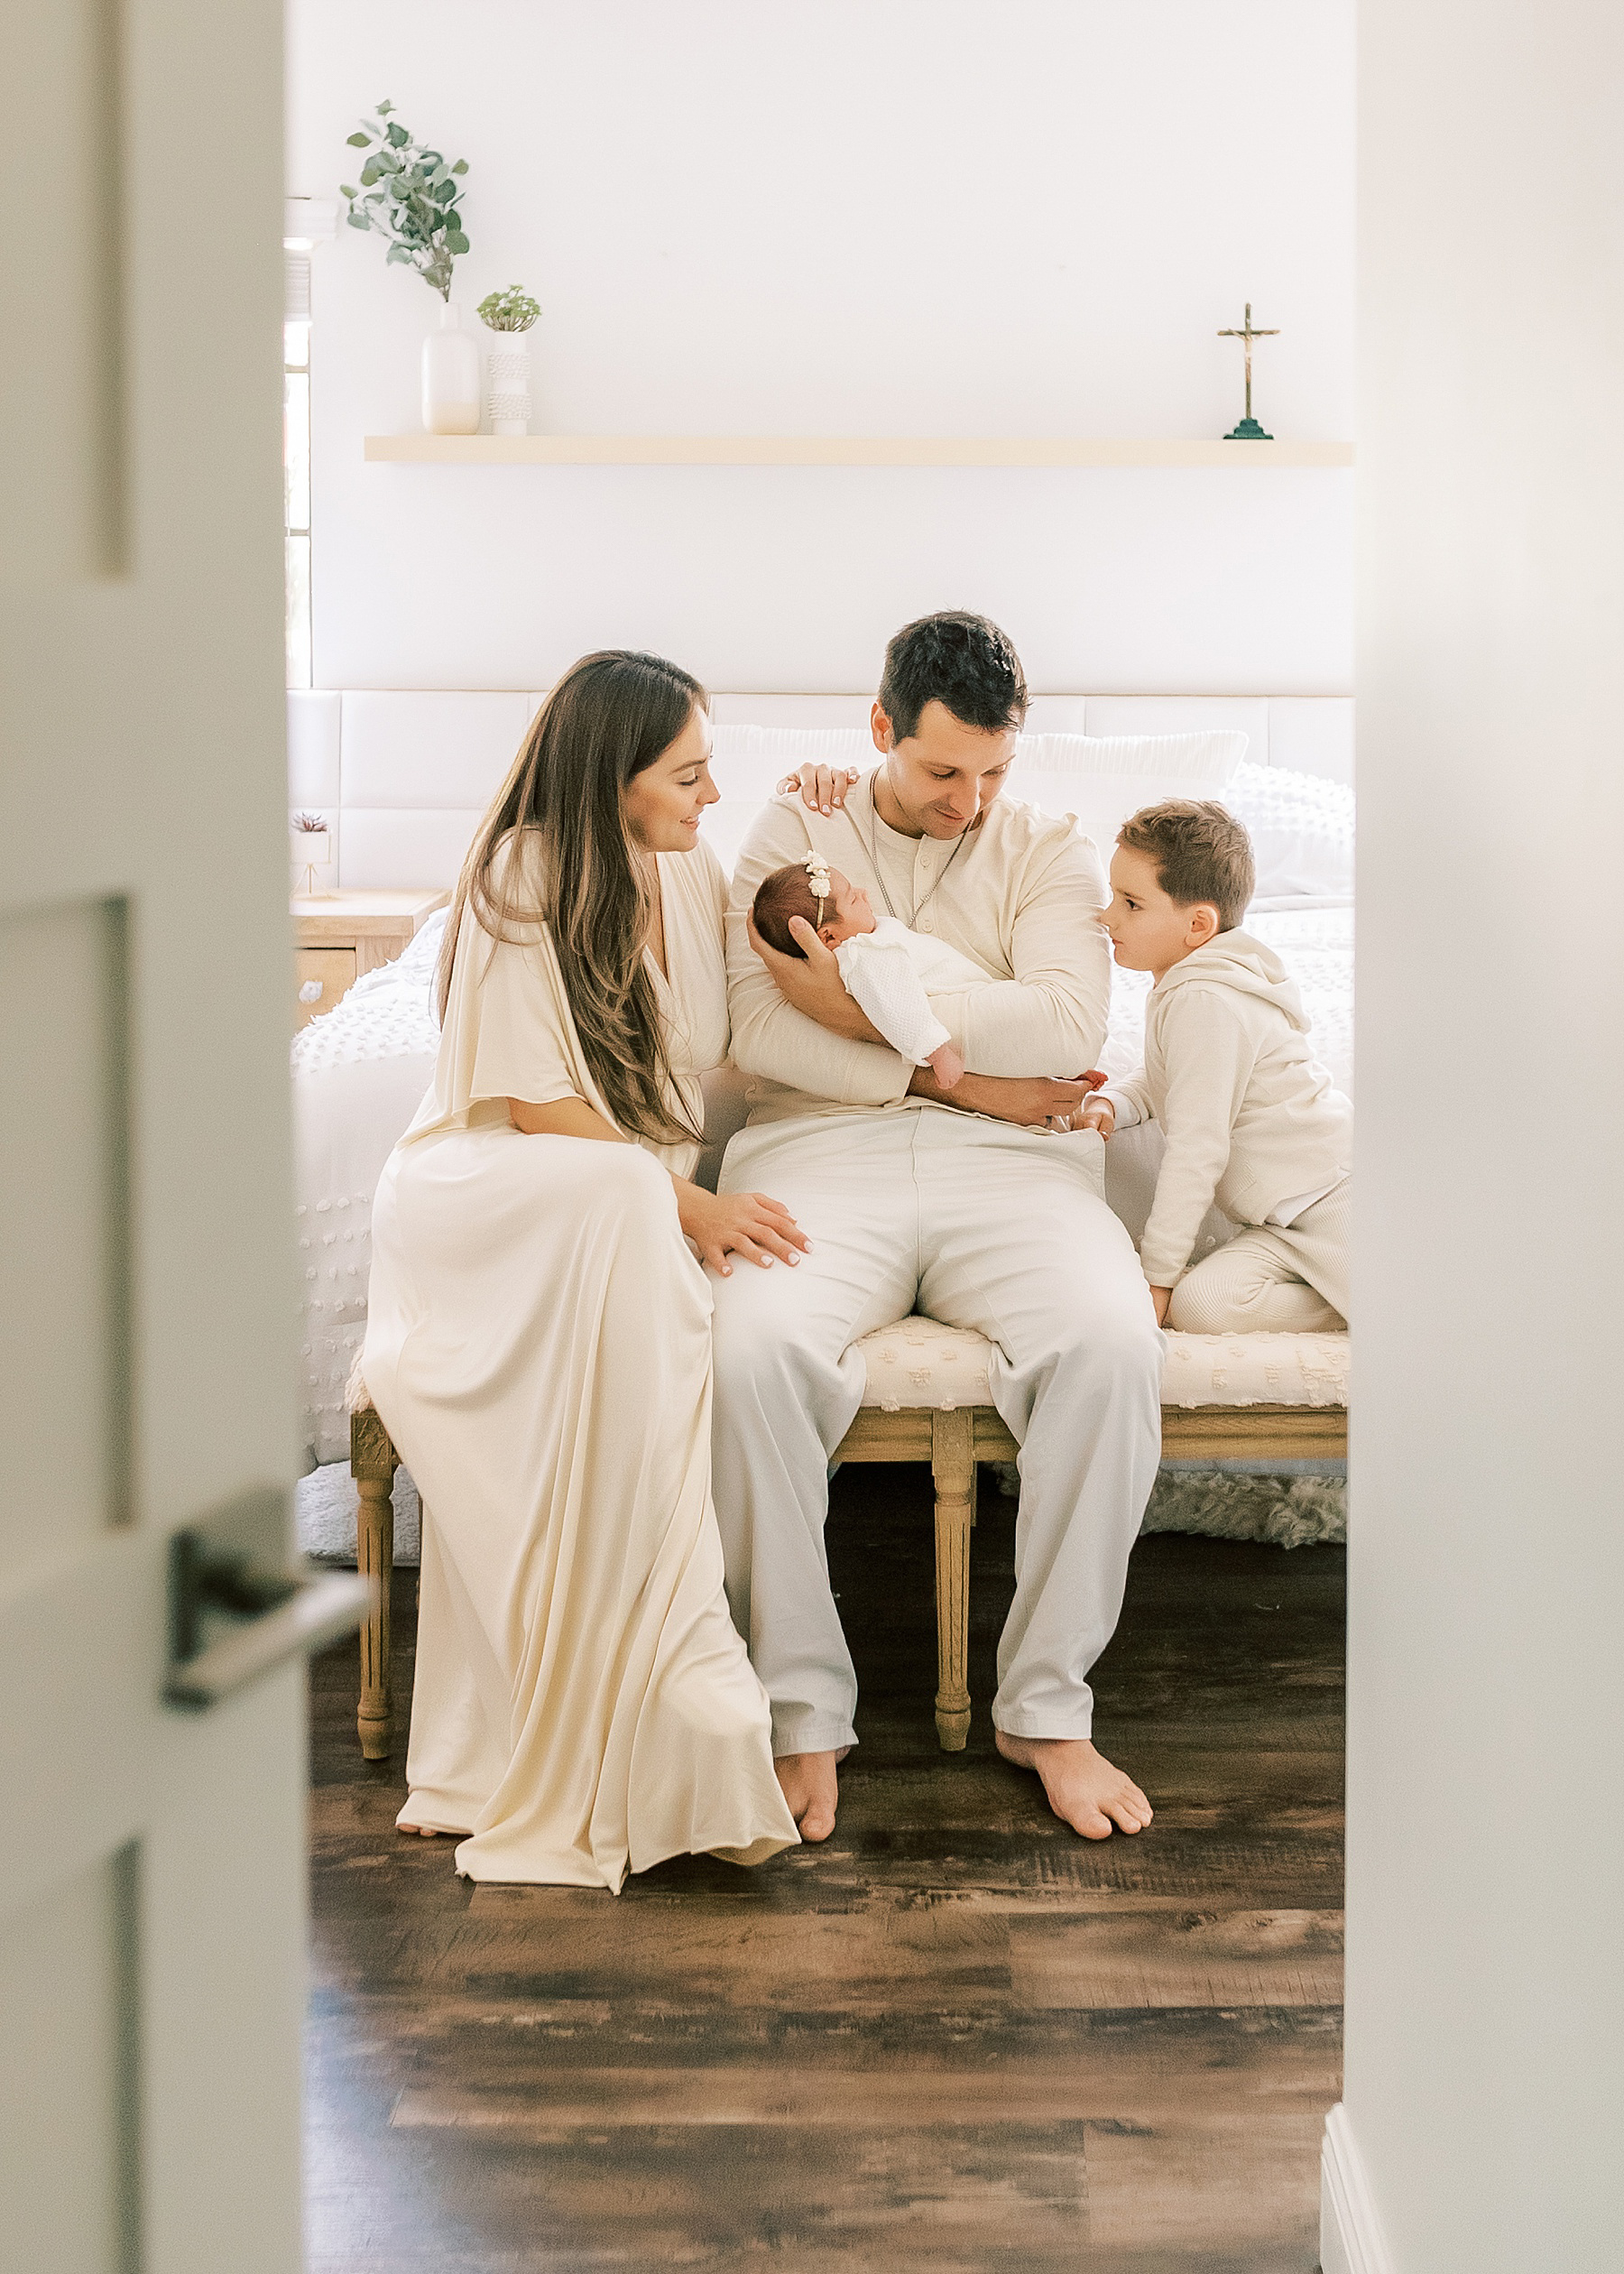 family dressed in tans and creams sitting on bed with white bedding holding newborn baby girl